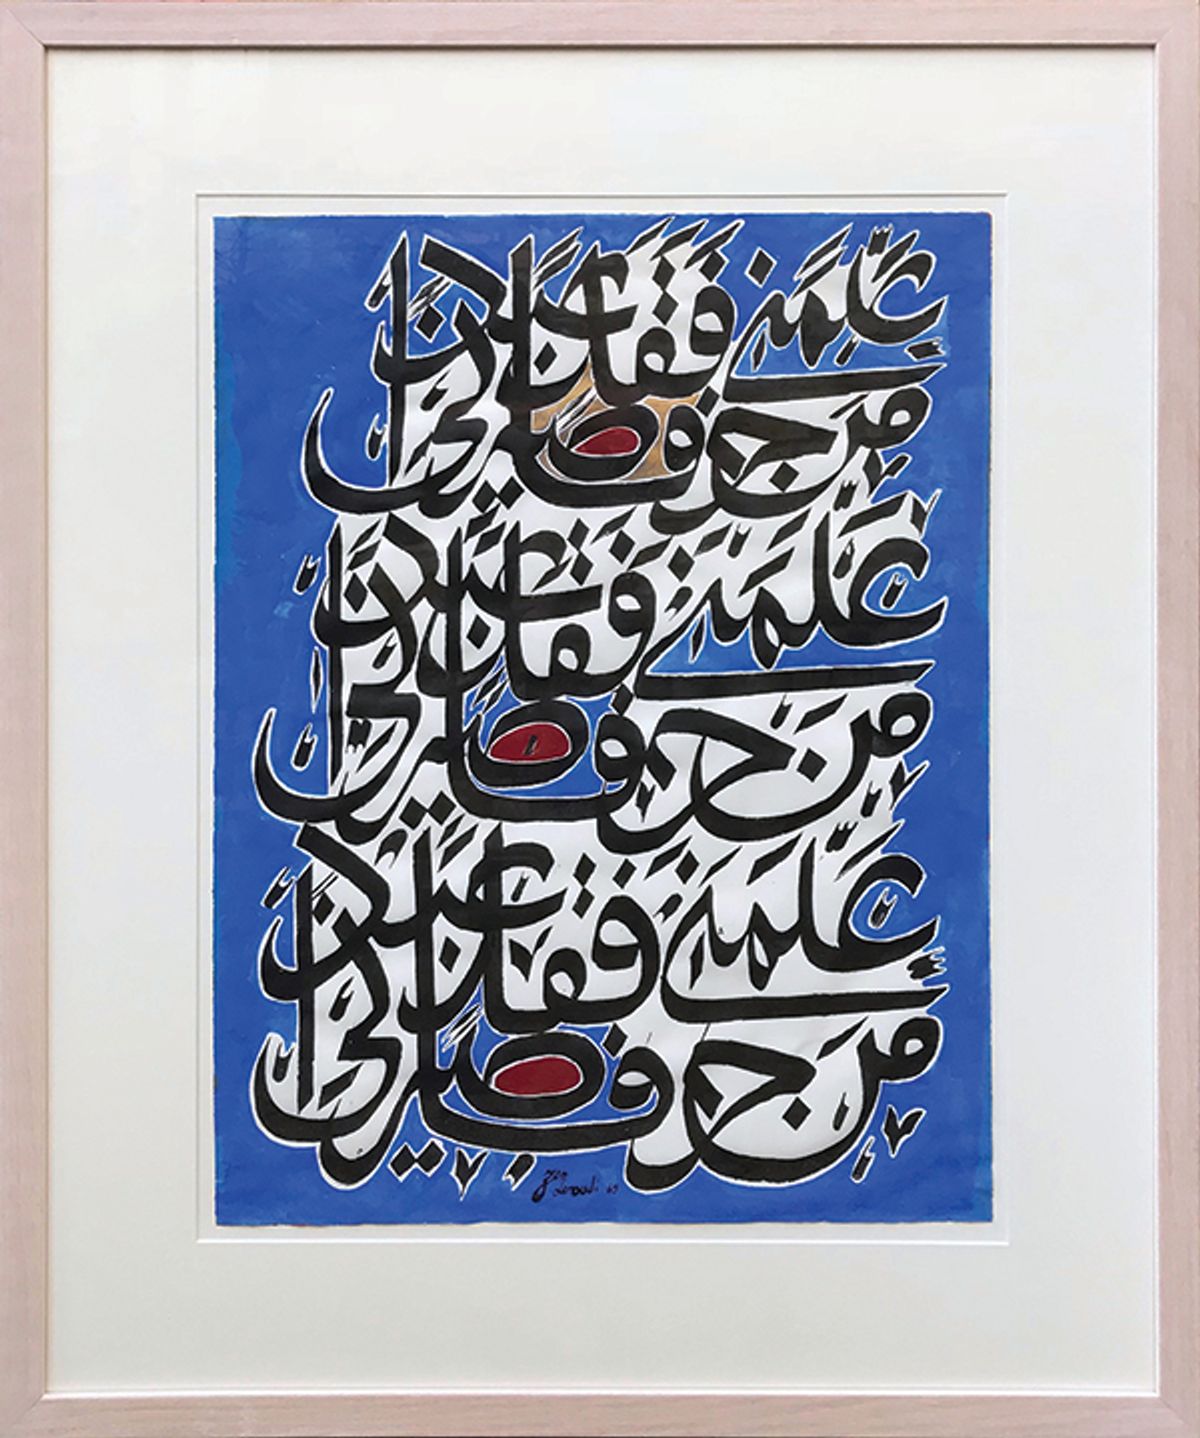 Calligraphic work belonging to Homa and Jean-Pierre Jacquemard which Charles hossein Zenderoudi said was not by him when asked to authenticate it Jean-Pierre Jacquemard.